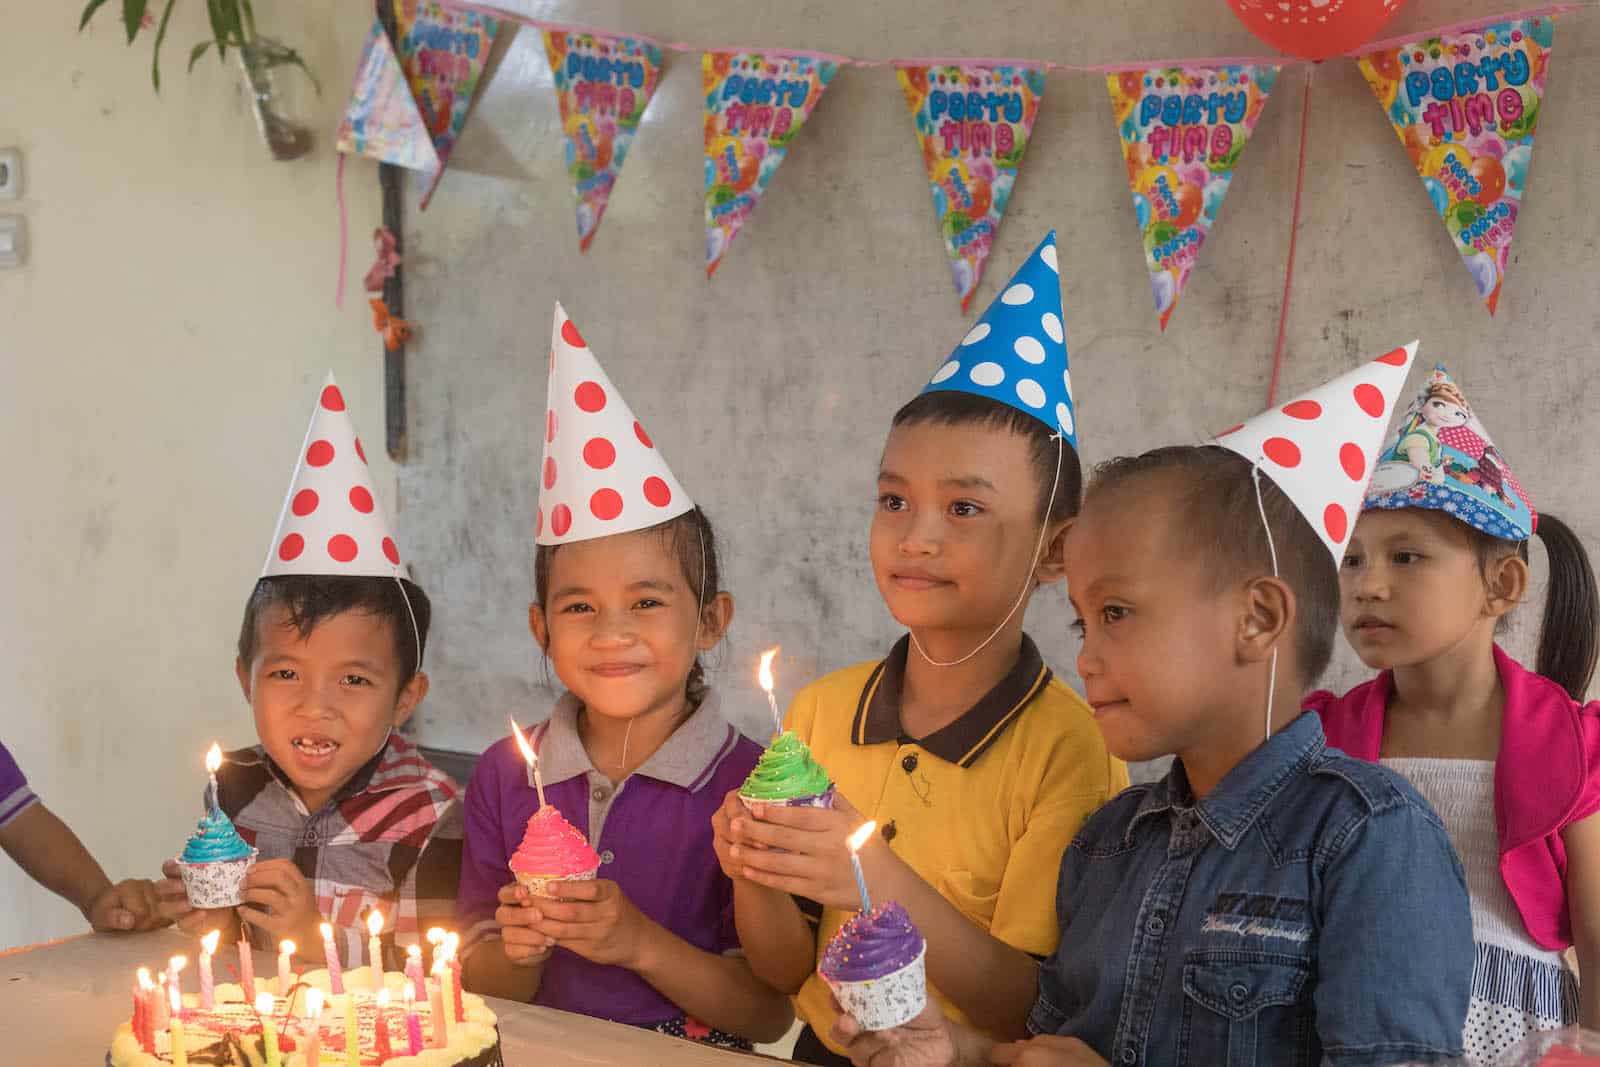 A group of children hold cupcakes, wearing birthday hats and standing in front of a lit birthday cake.